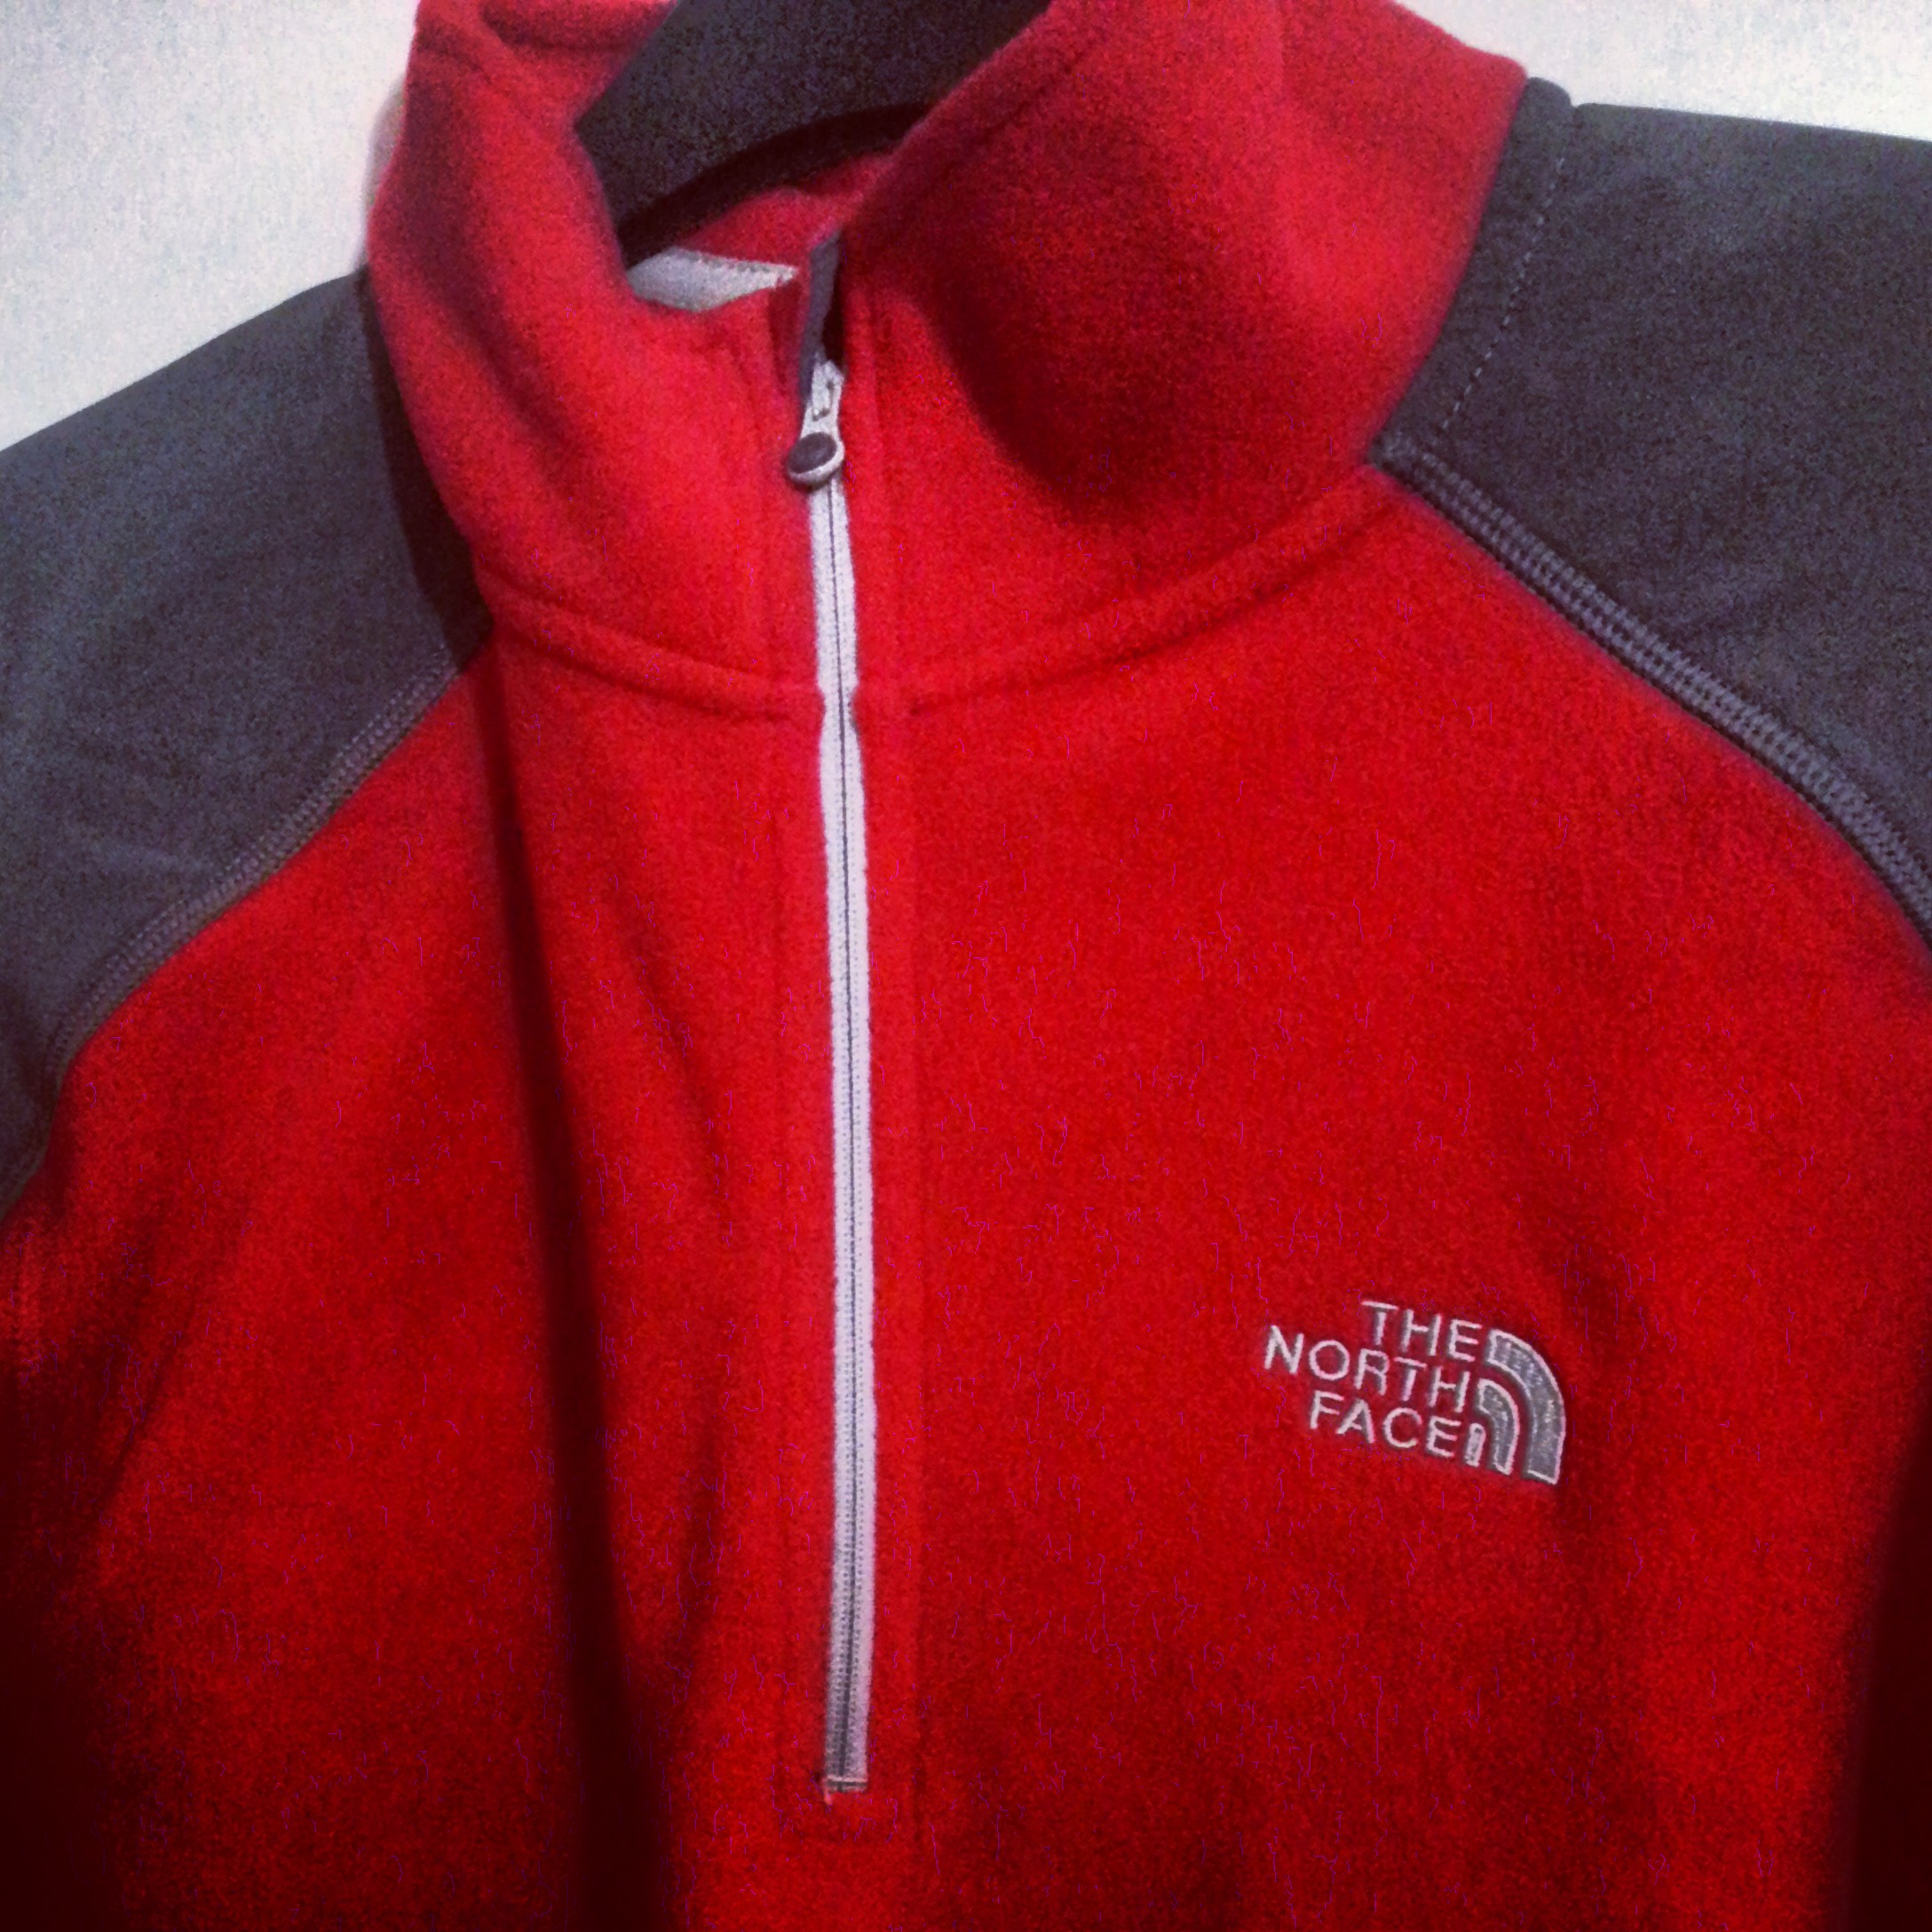 Warmth without the weight: North Face Polartec fleece